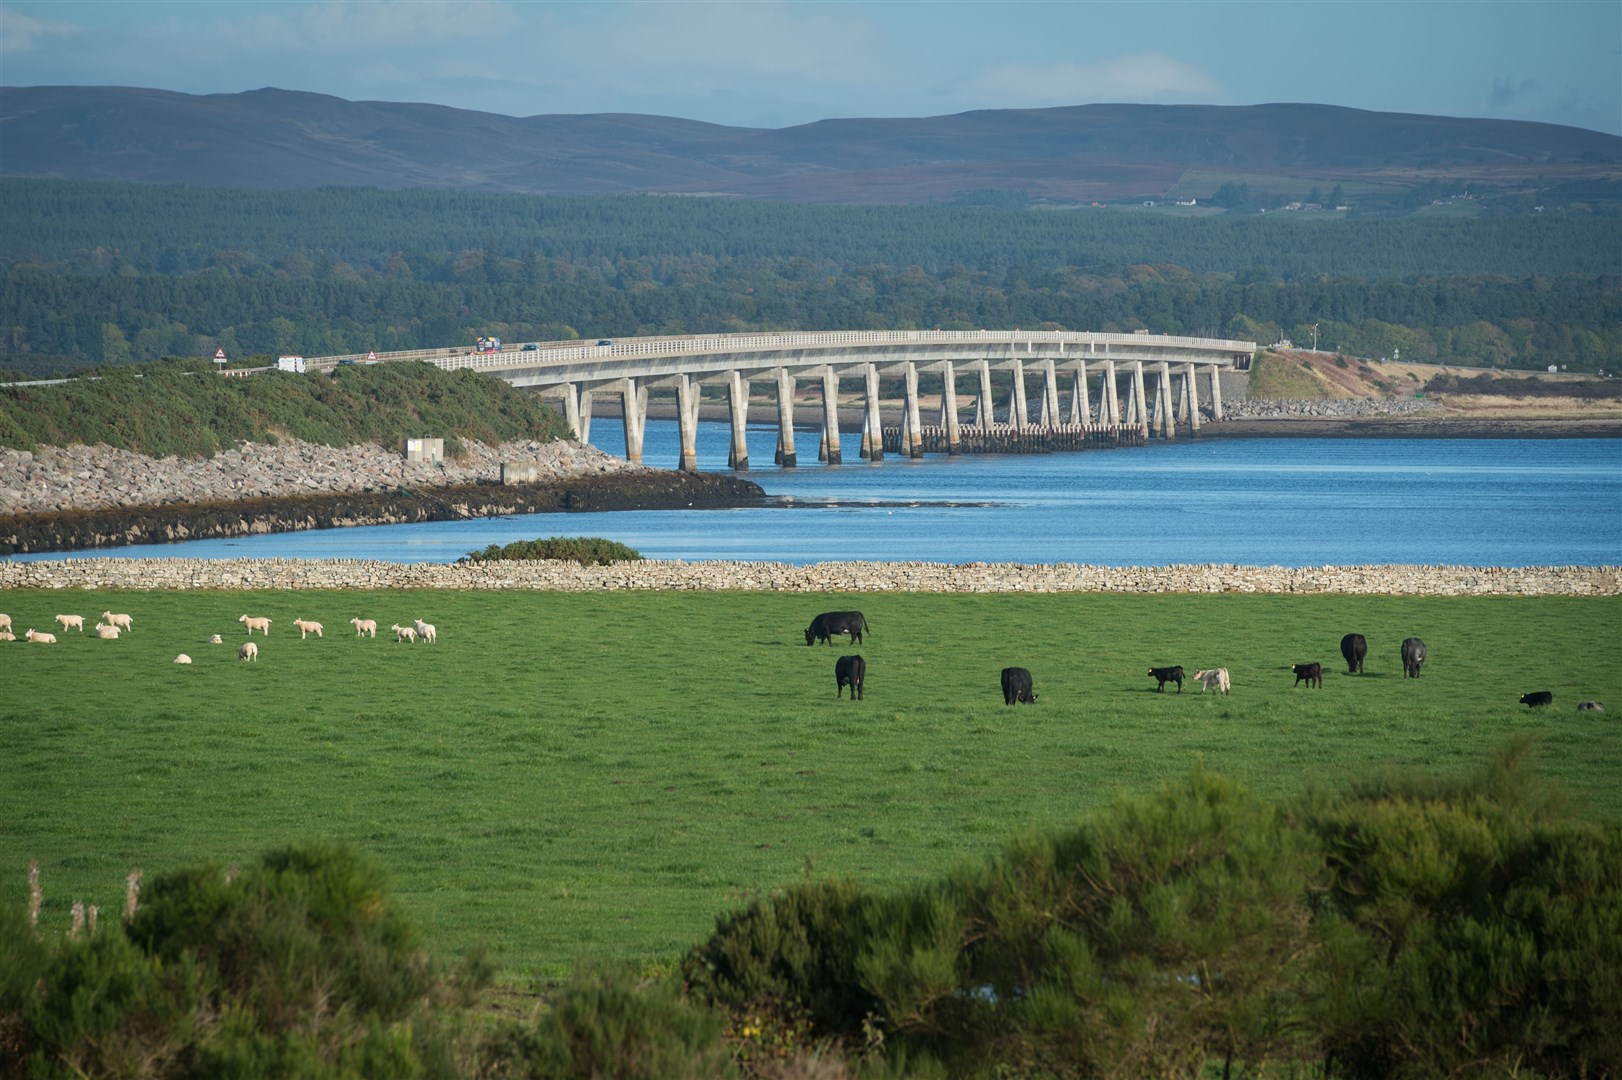 The Dornoch Bridge has been affected by an accident this afternoon.